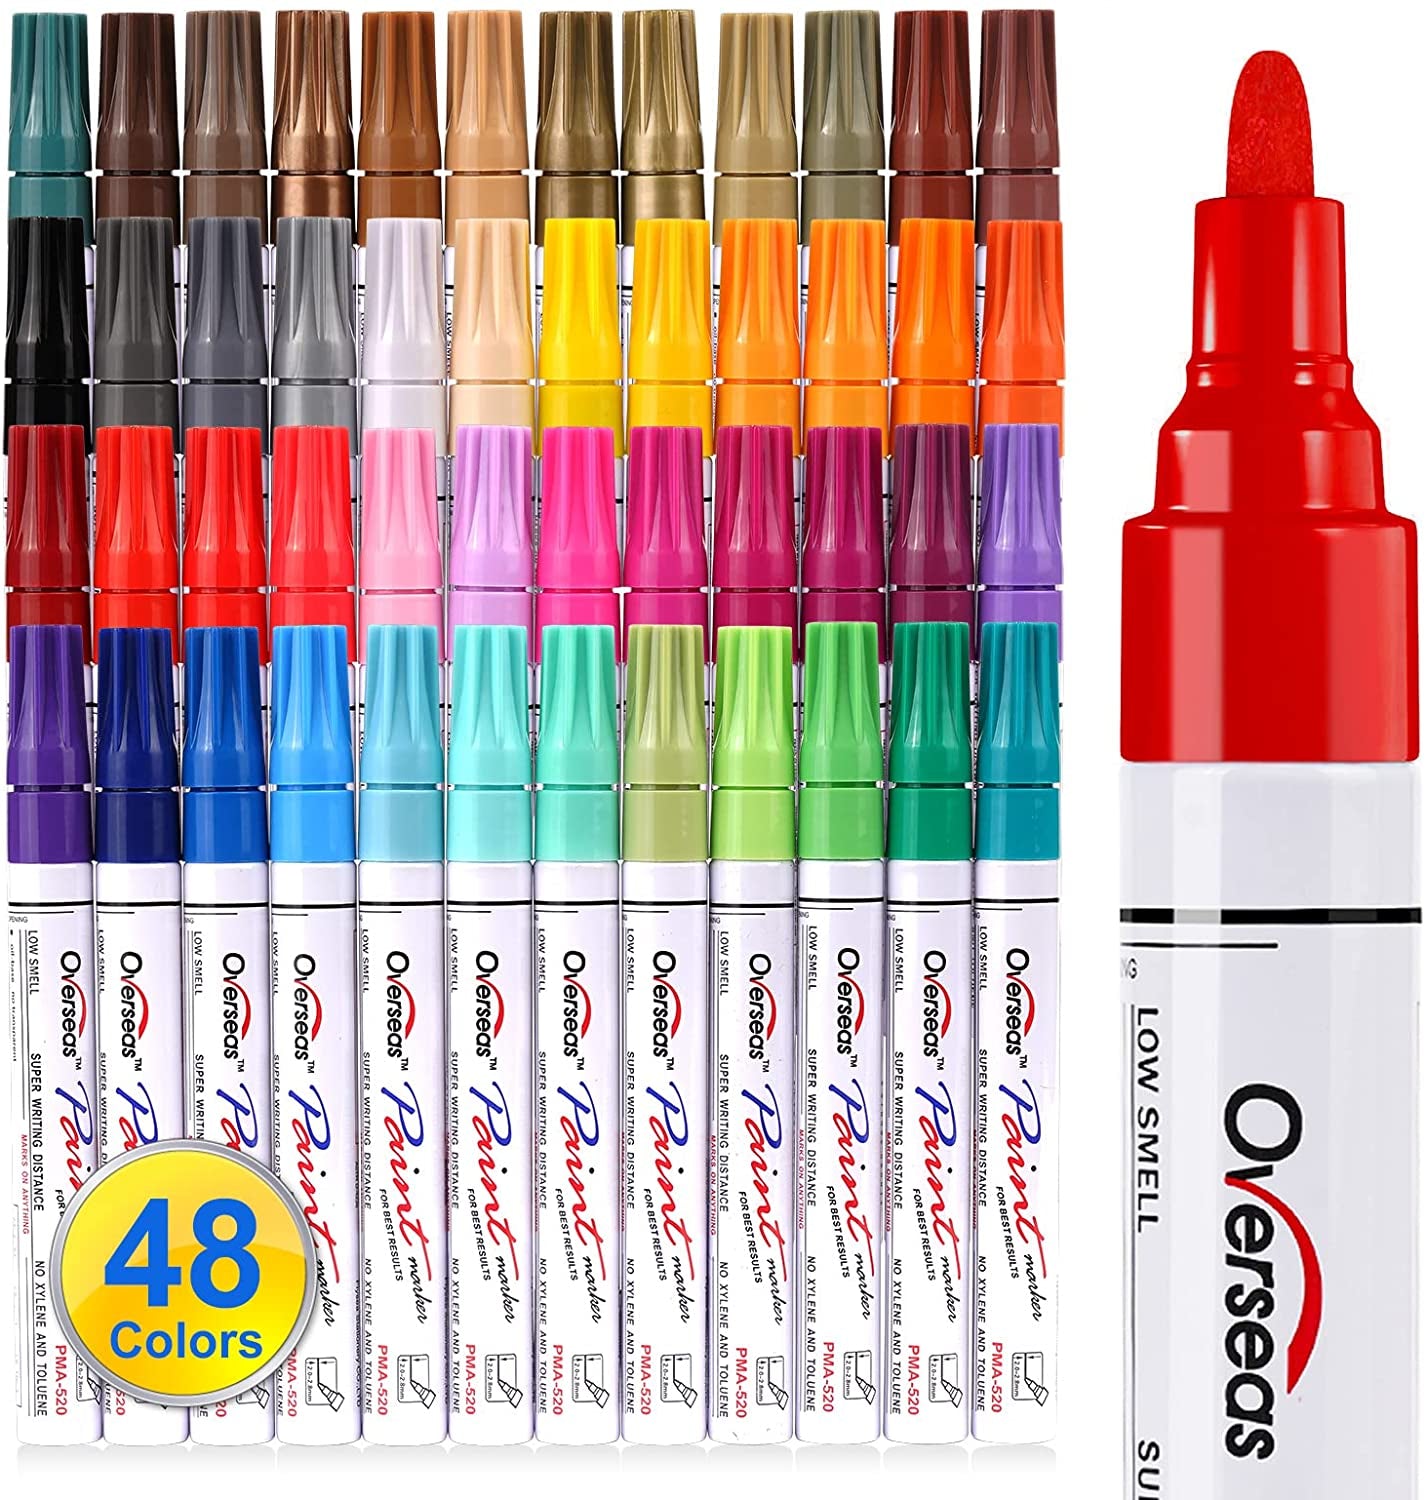 Paint Marker Pens - 24 Colors Permanent Oil Based Paint Markers,Medium Tip,Quick Dry and Waterproof Assorted Color Marker for Metal,Wood,Fabric